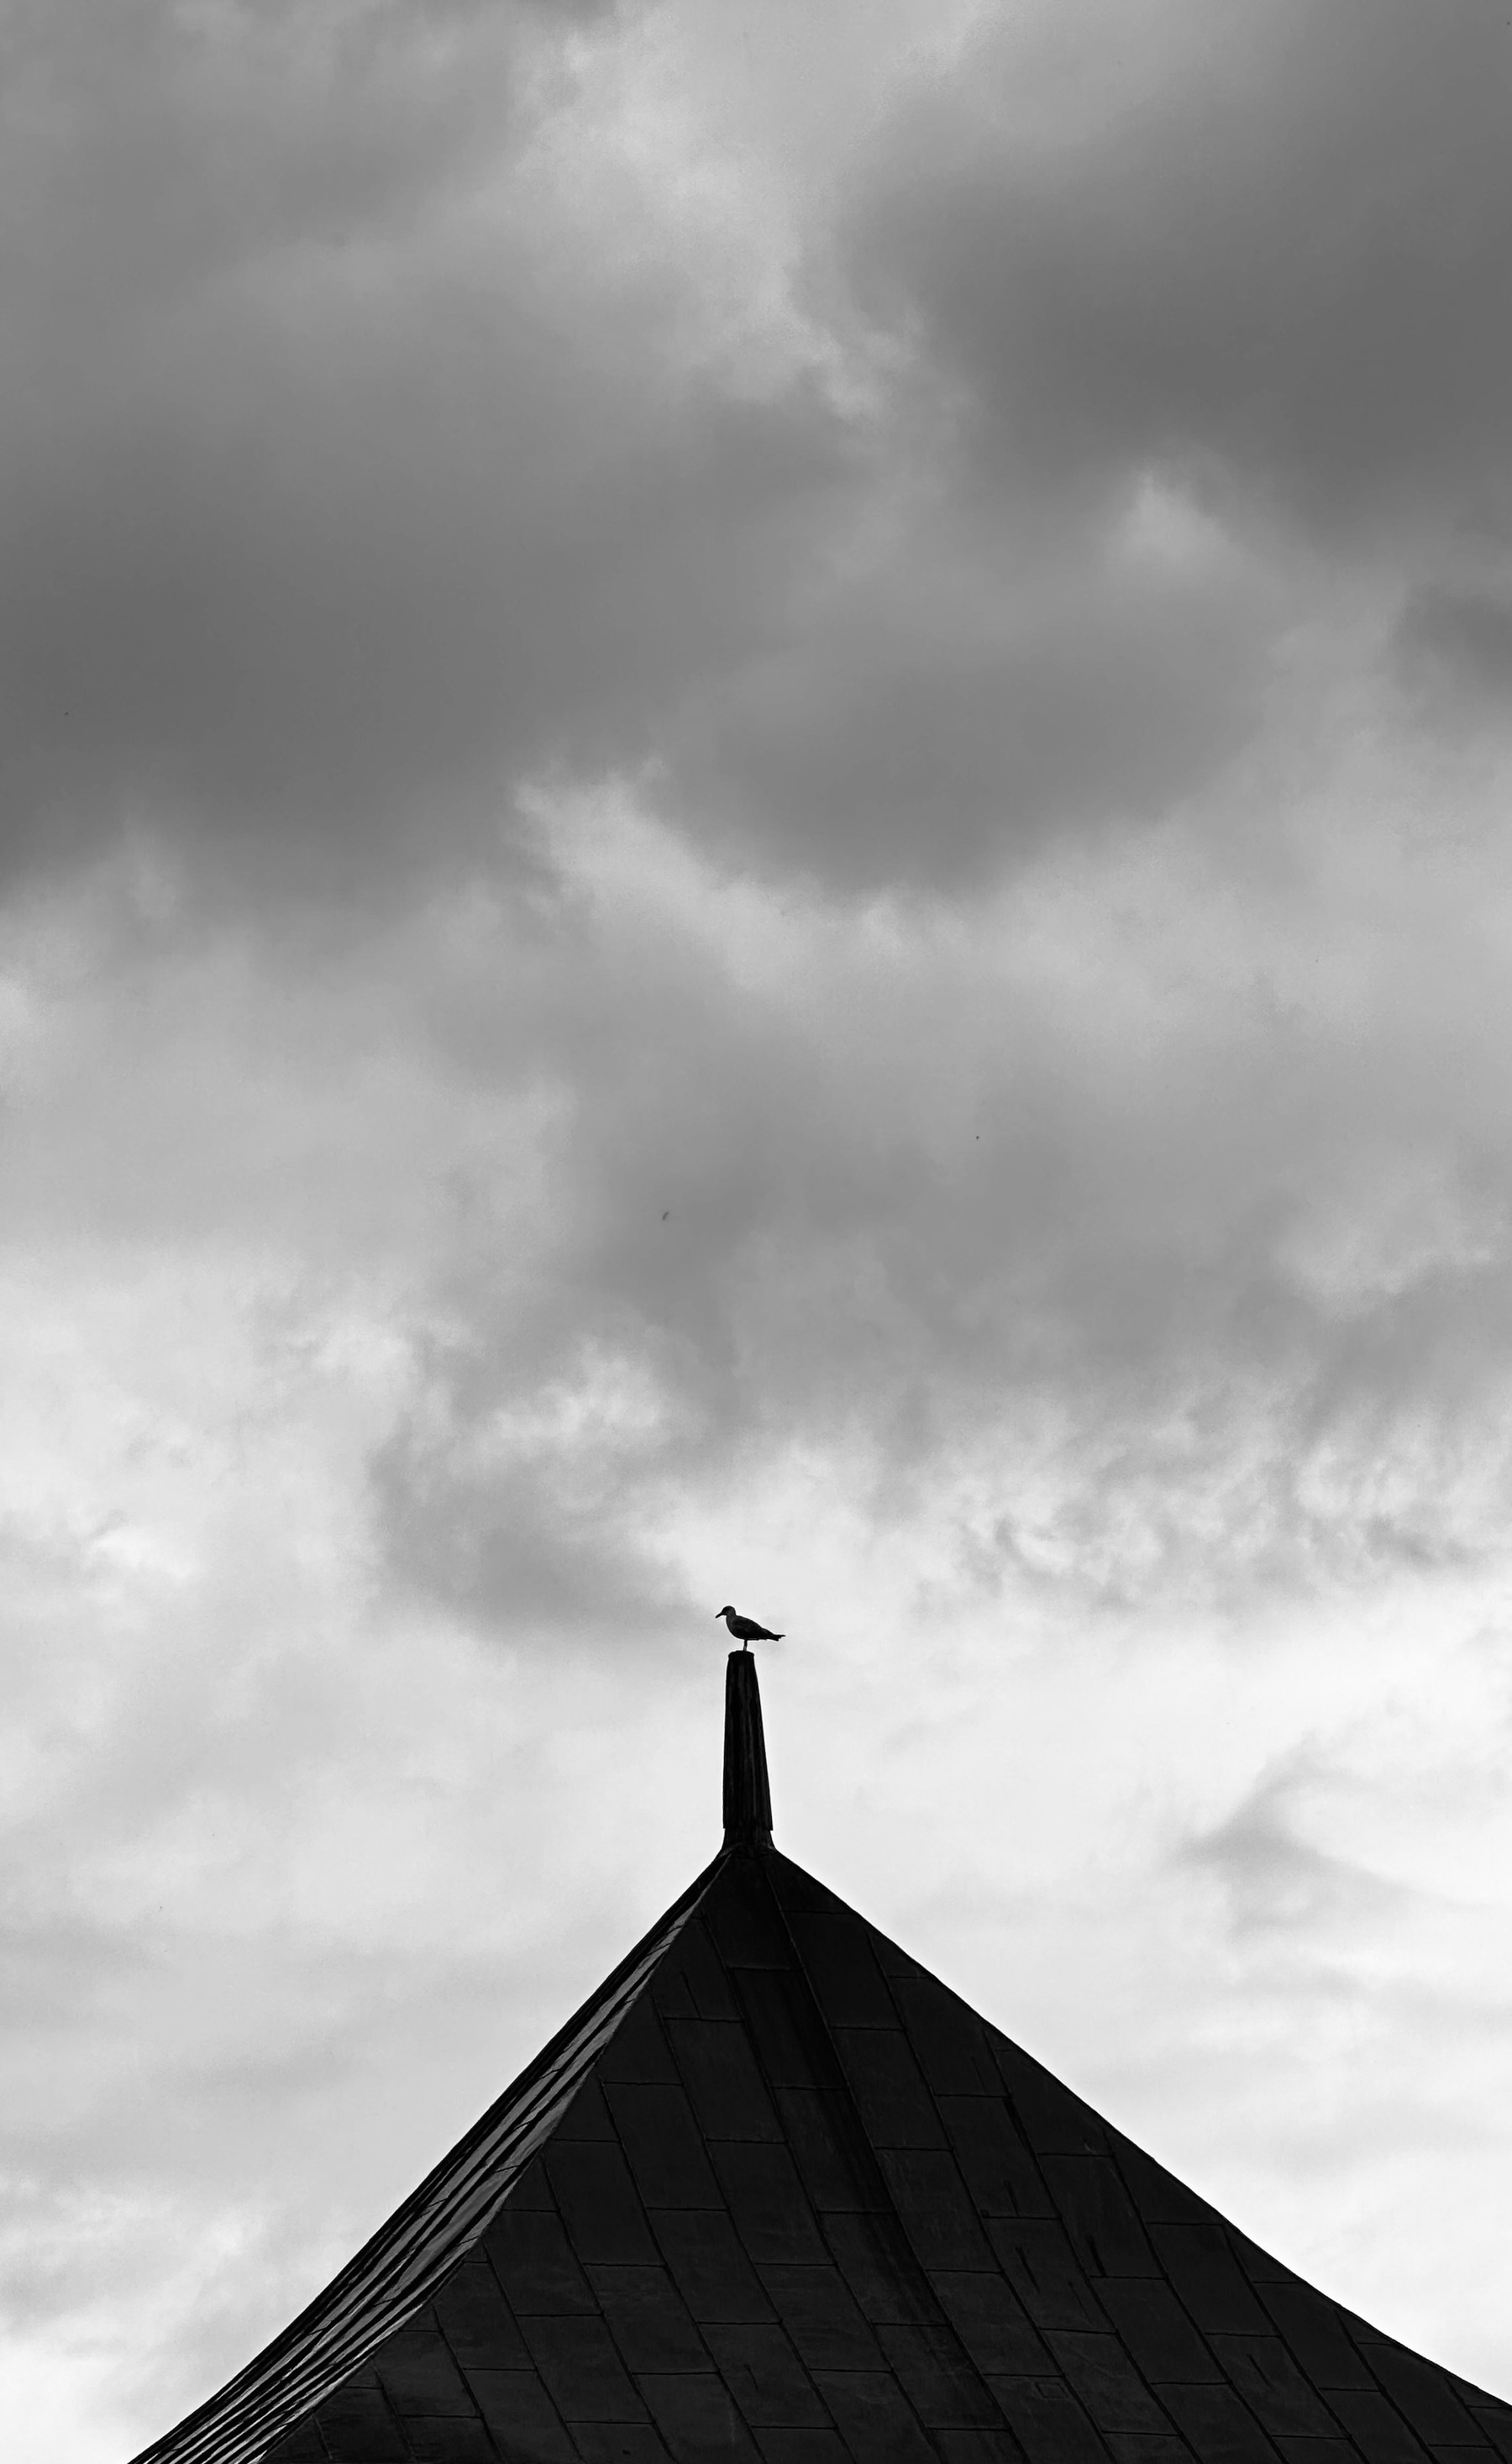 A seagull perched on top of a roof with a cloudy sky behind.